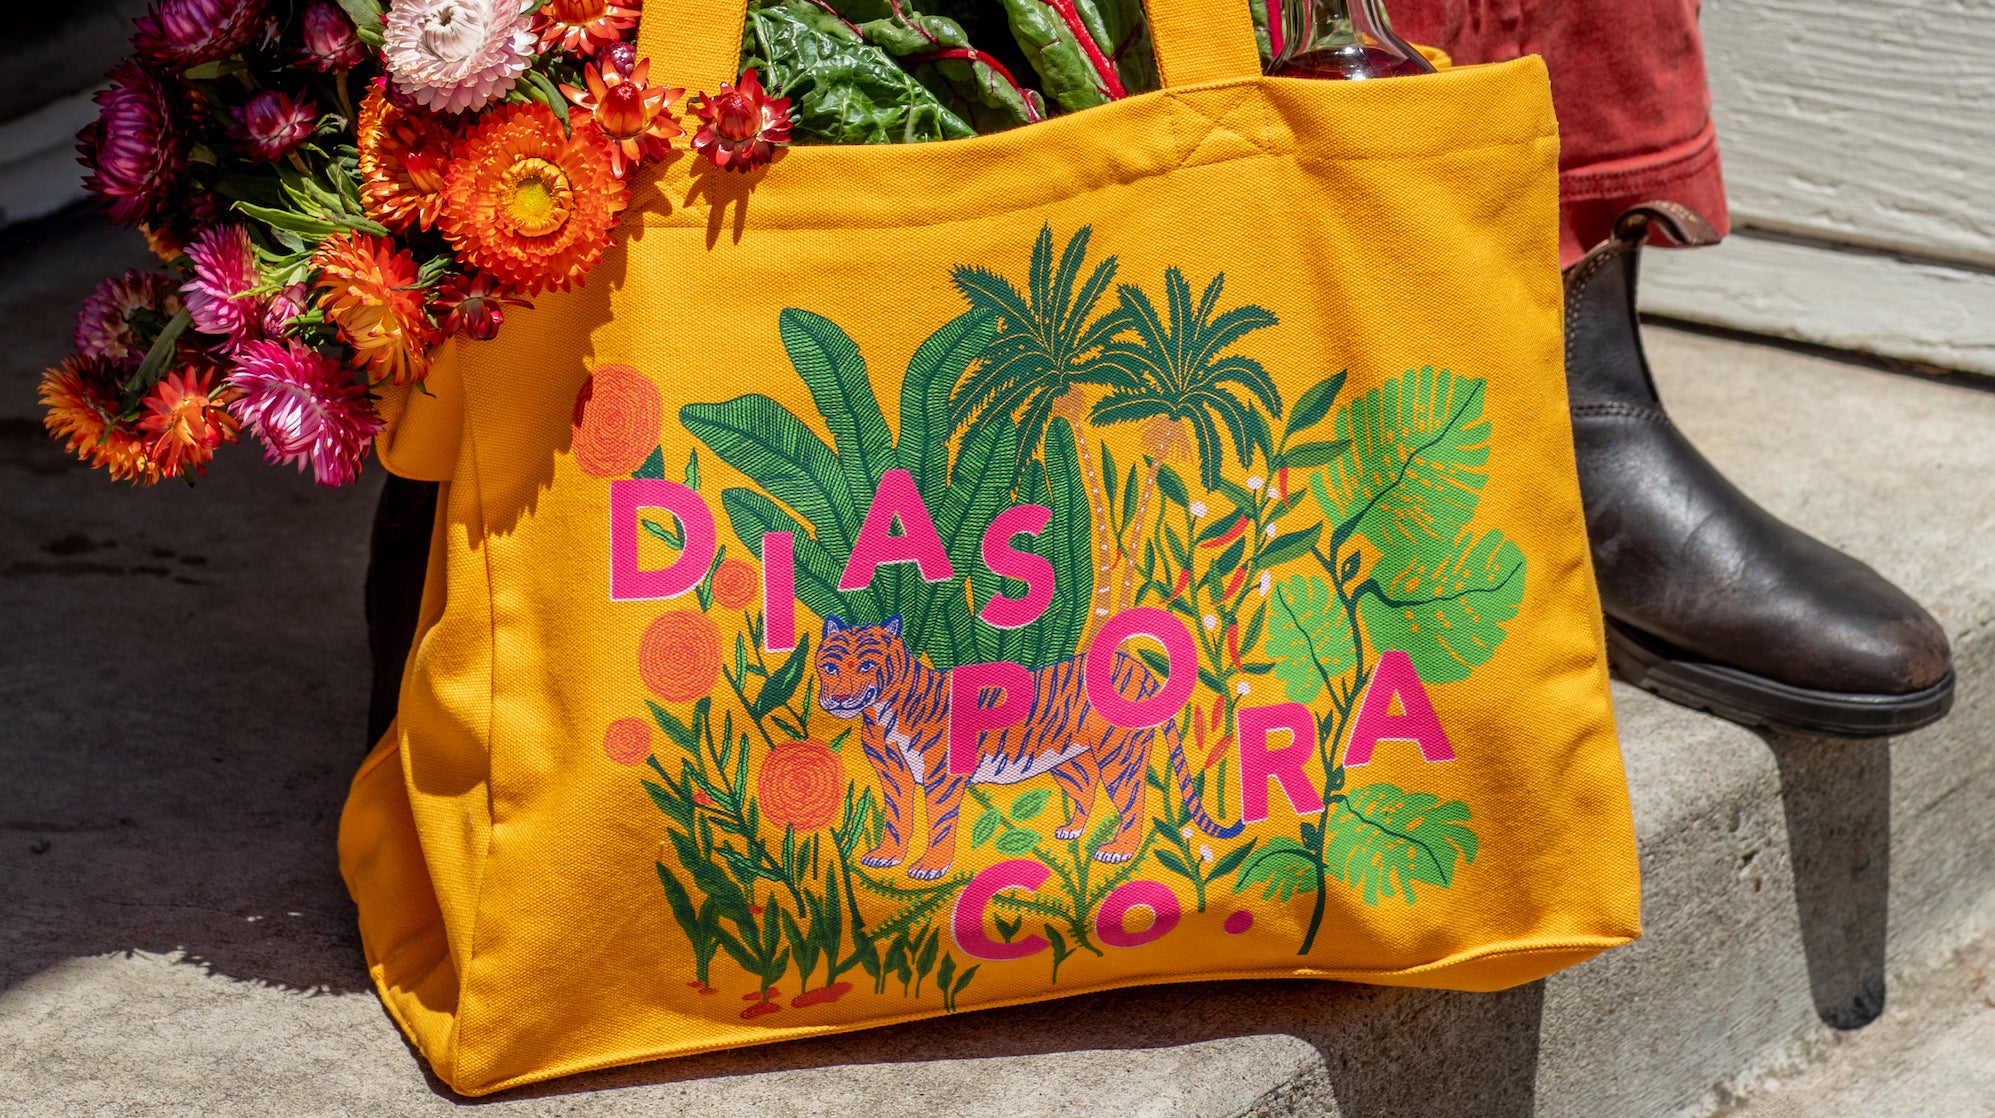 Photo of our market tote bag full of flowers and leafy greens